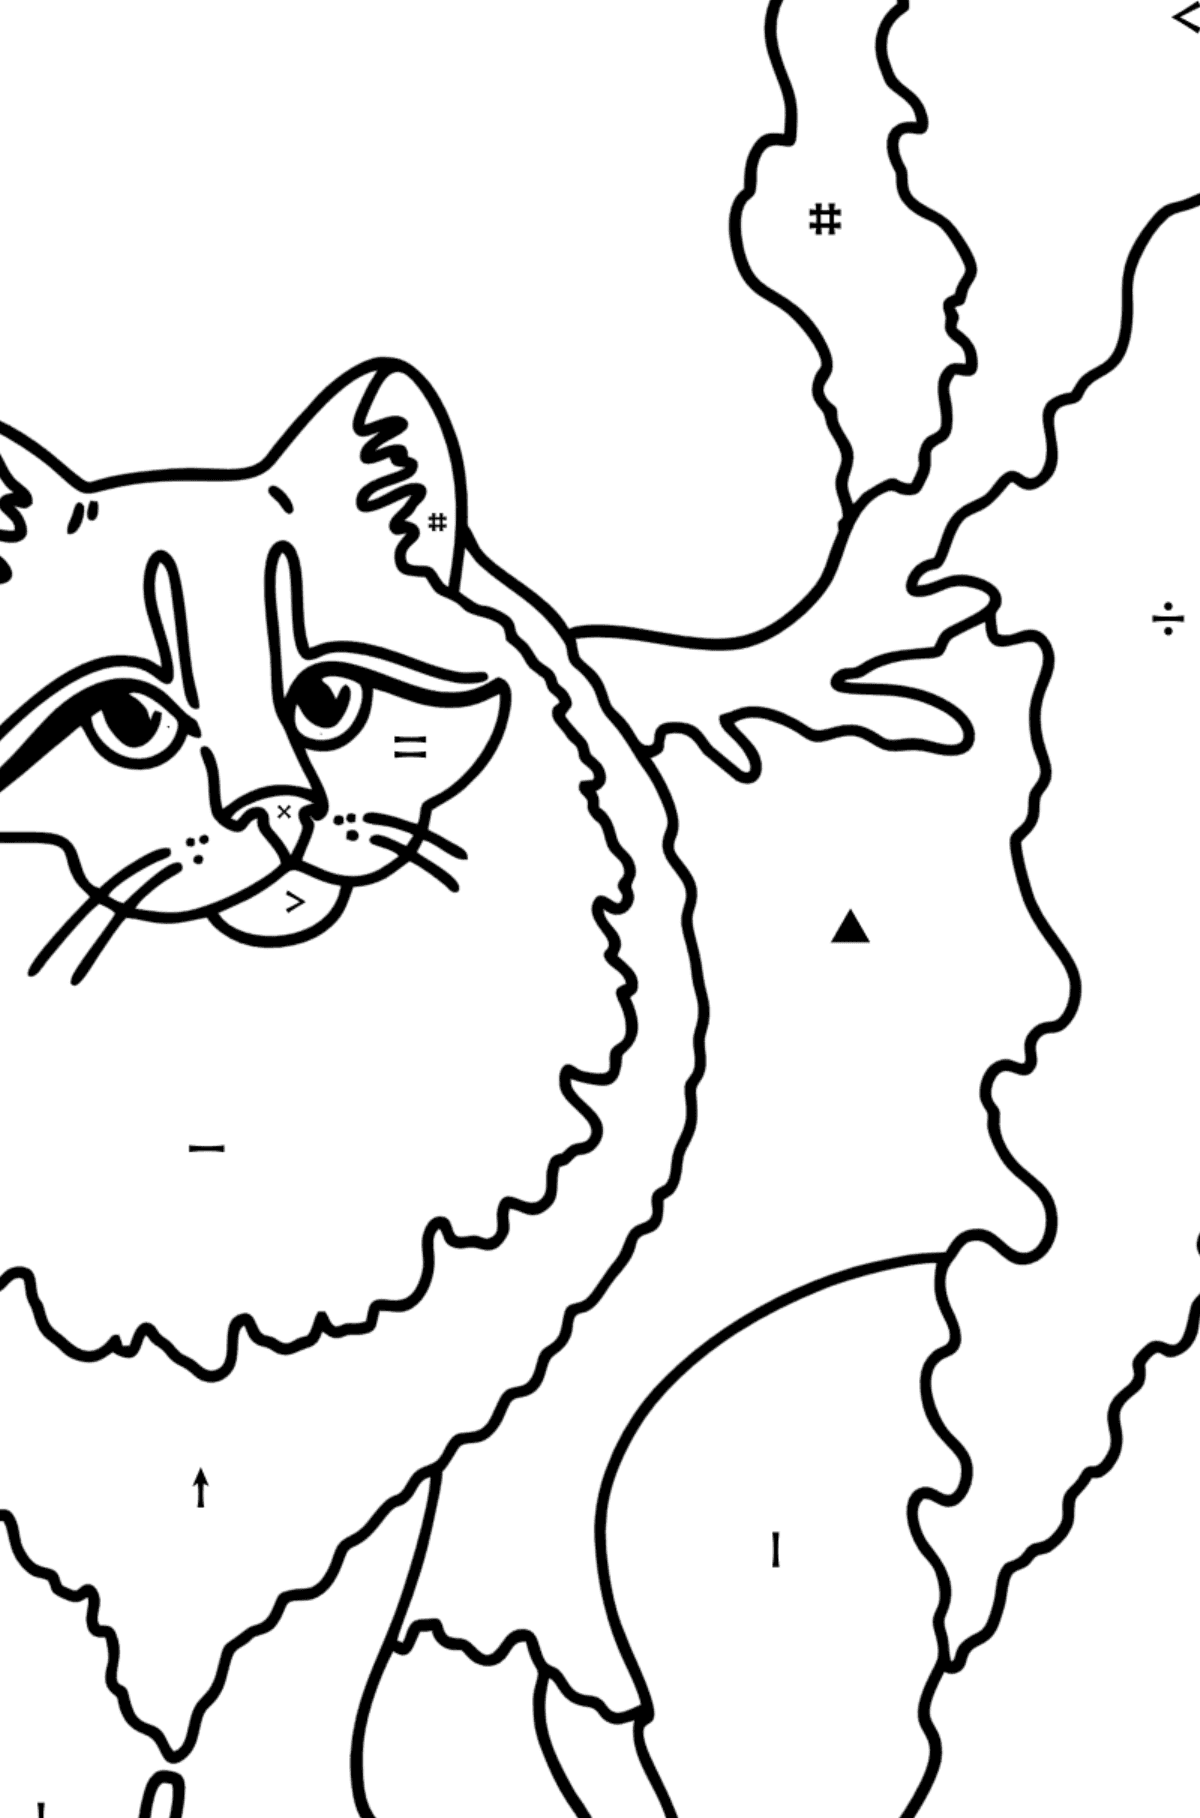 Siberian Cat coloring page - Coloring by Symbols for Kids